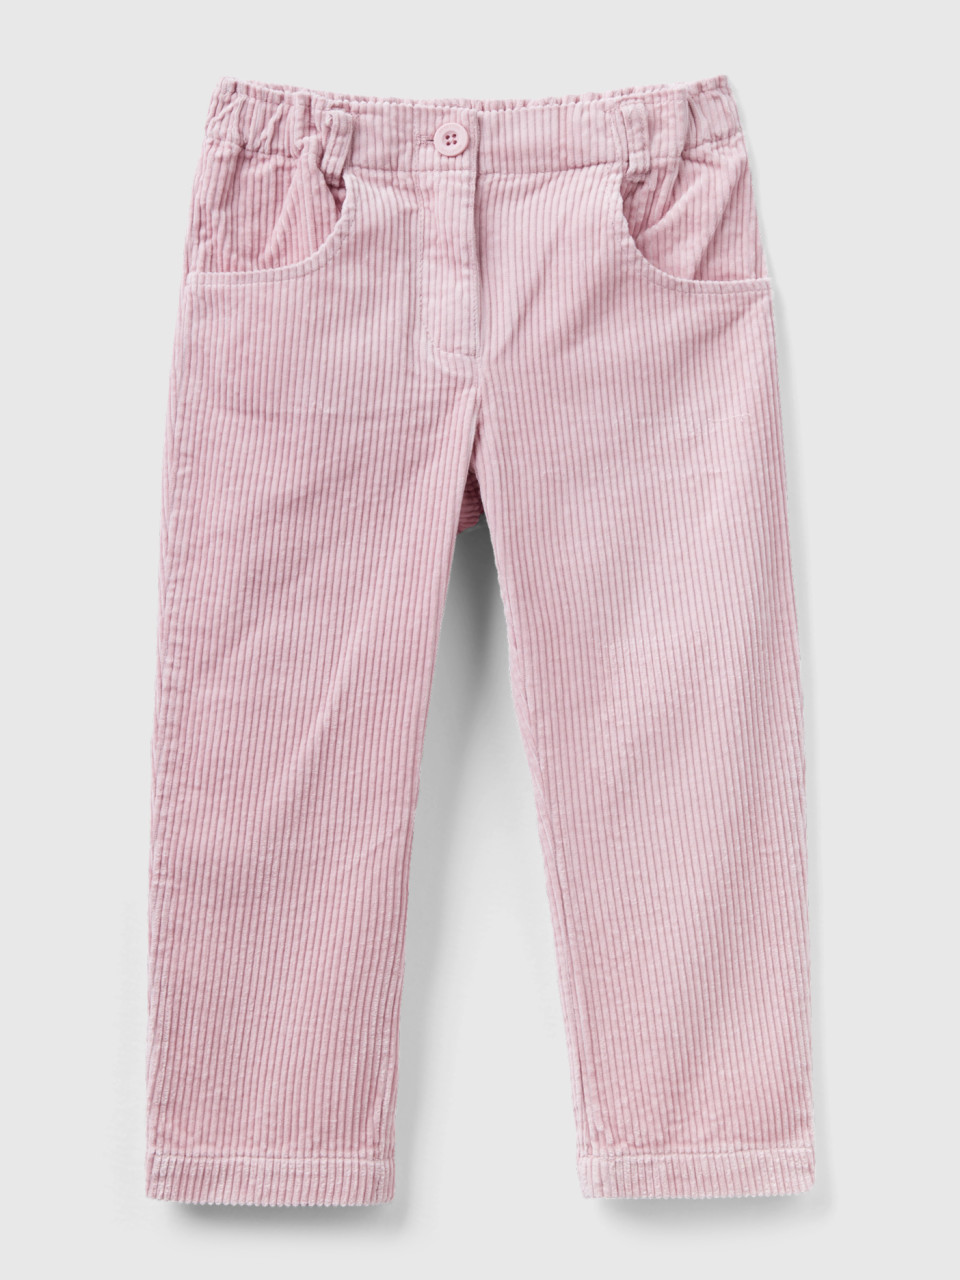 Benetton, Corduroy Trousers With Elastic, Pink, Kids